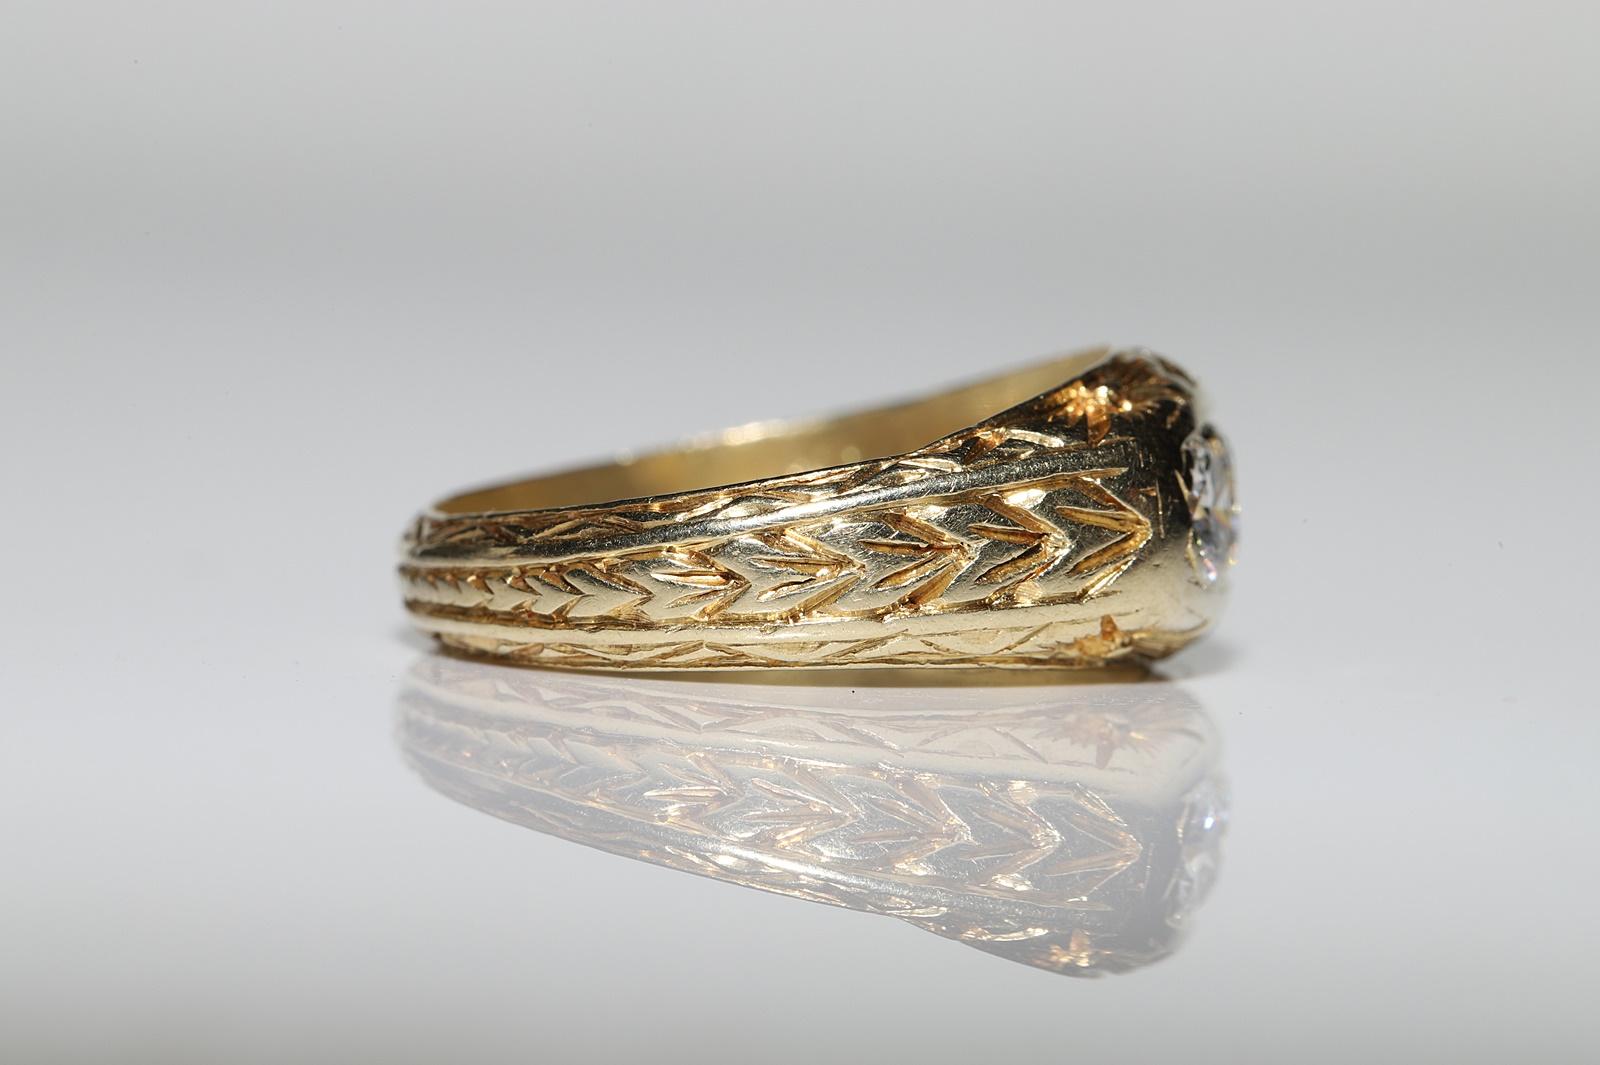 Antique Circa 1900s Handmade 14k Gold Natural Diamond Decorated Band Ring In Good Condition For Sale In Fatih/İstanbul, 34